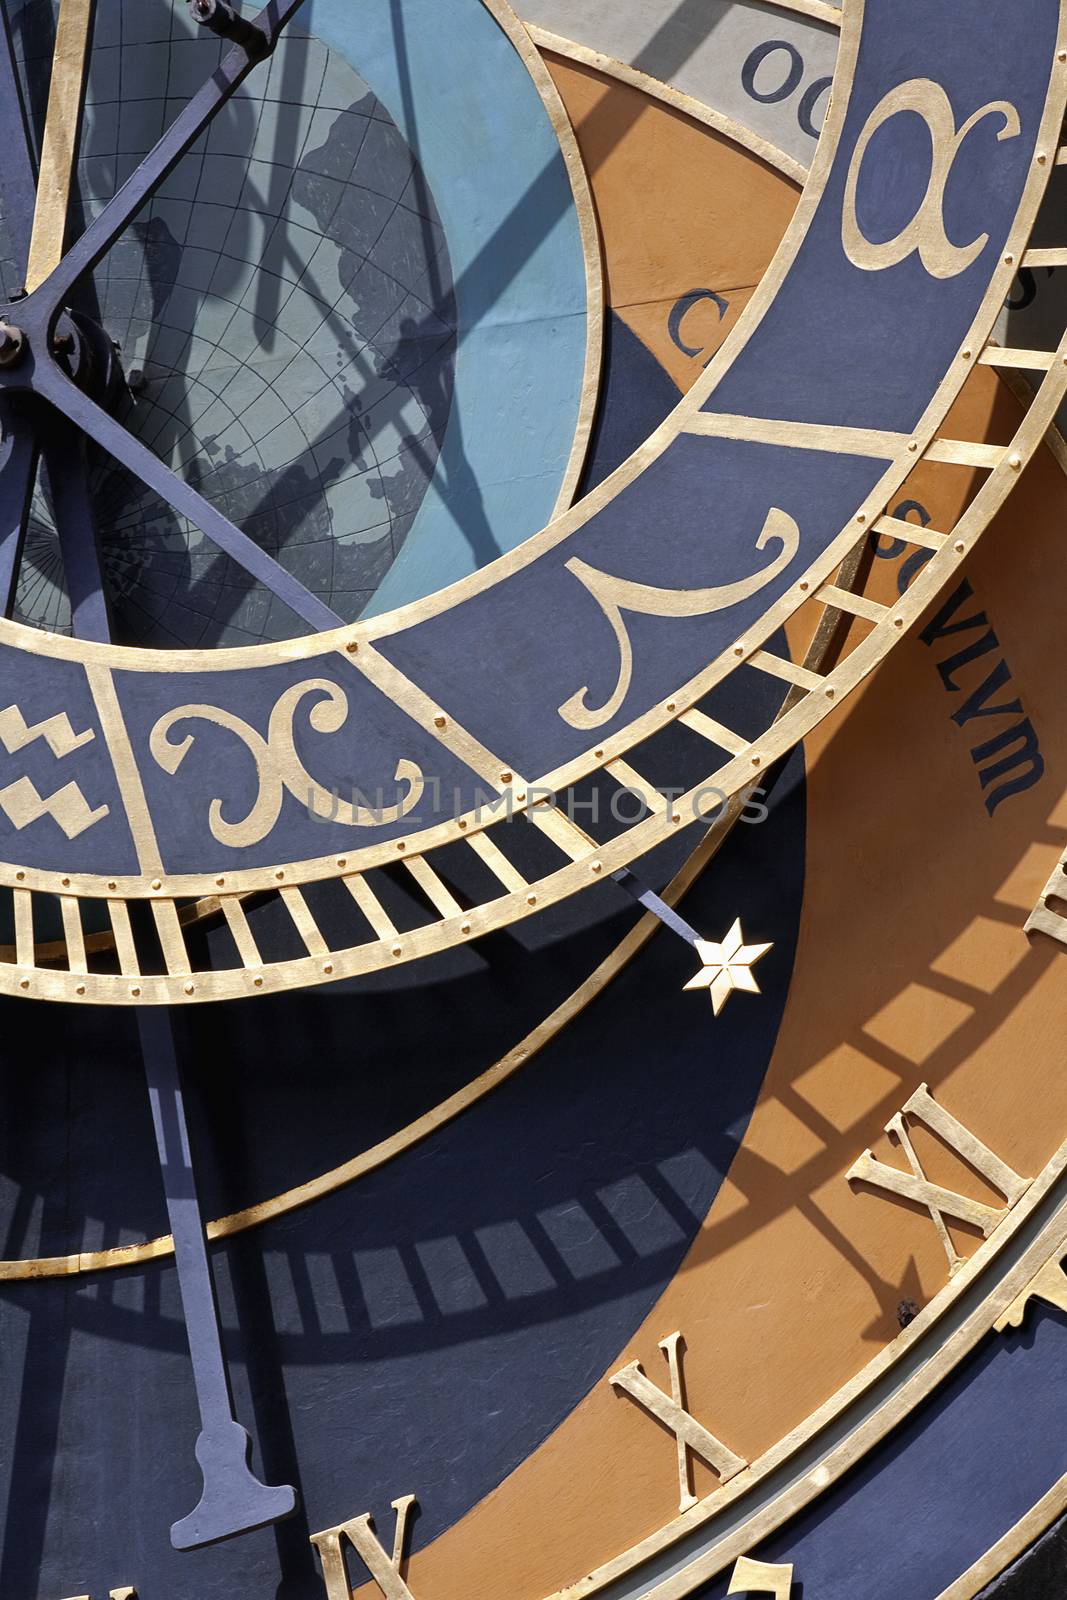 detail of astronomical clock of old town hall, old town square, prague